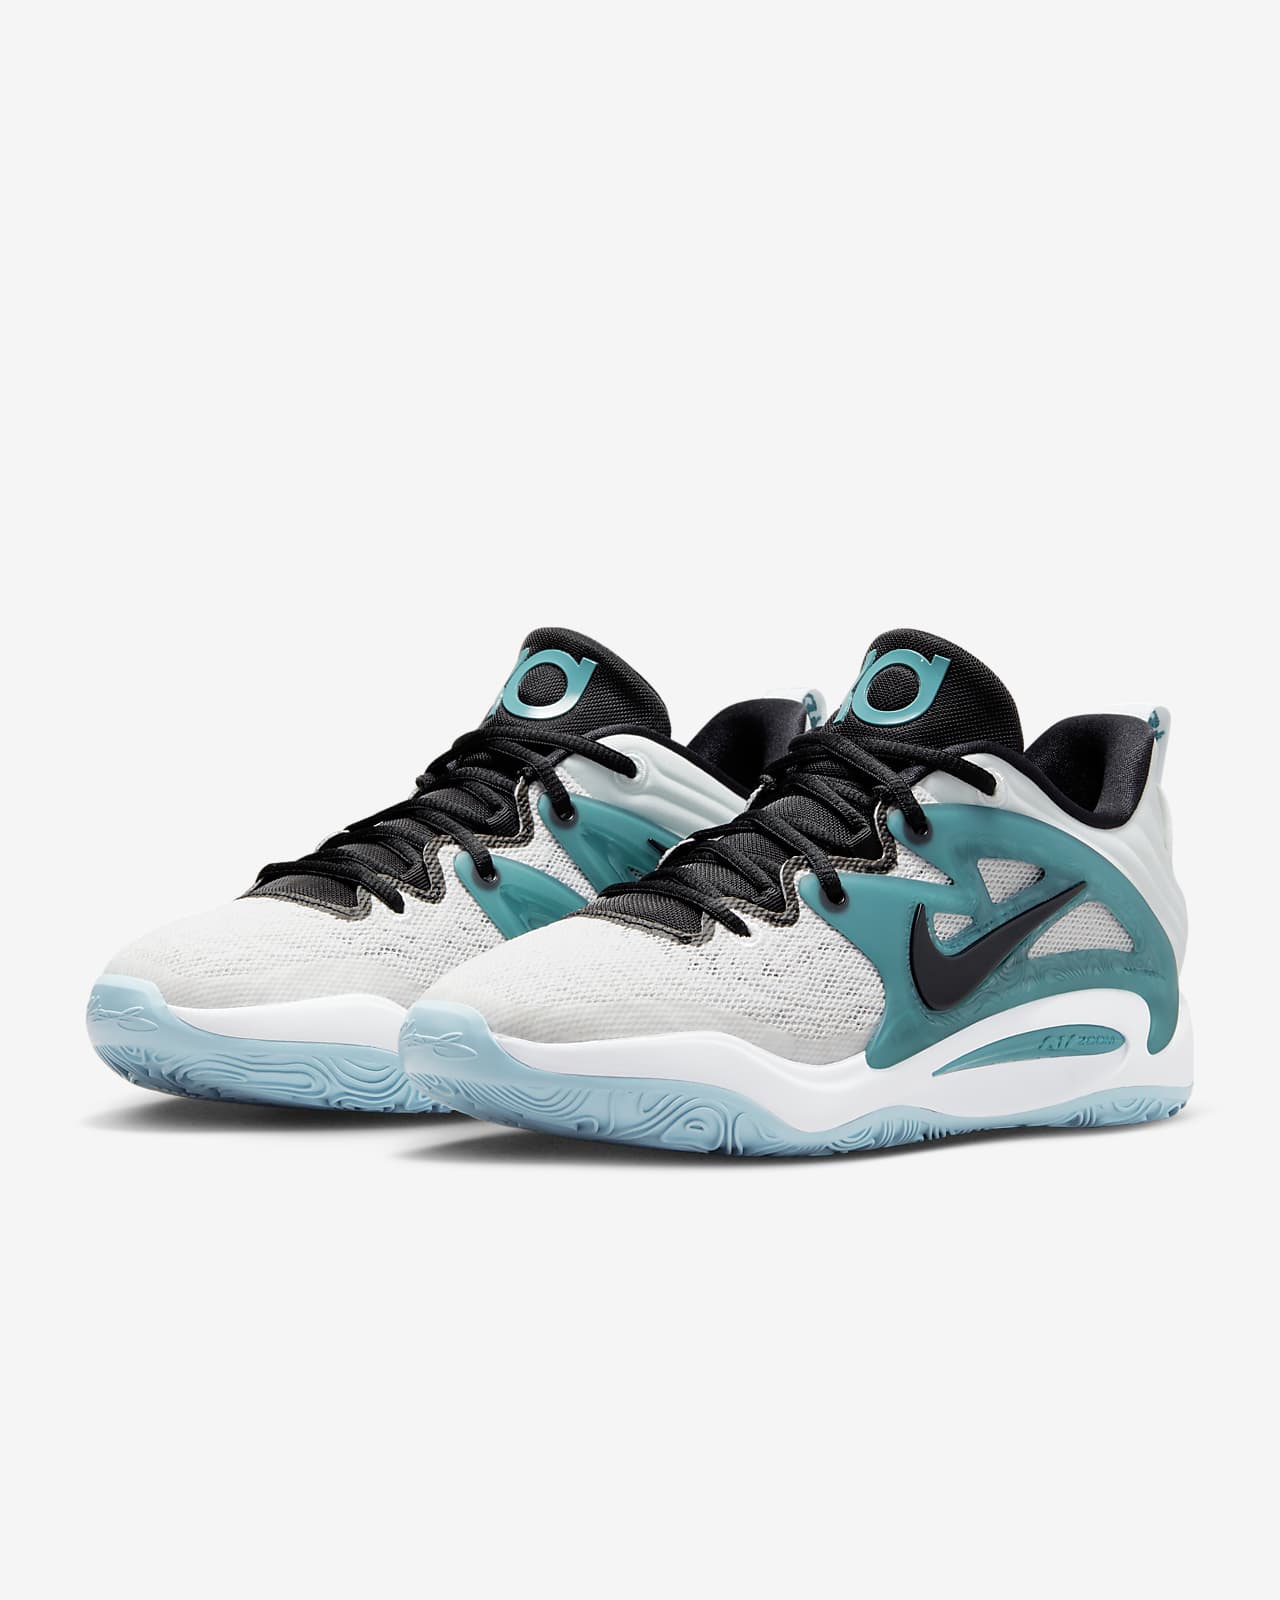 Nike KD 15 Photon Dust Teal 27cm ナイキ | camillevieraservices.com